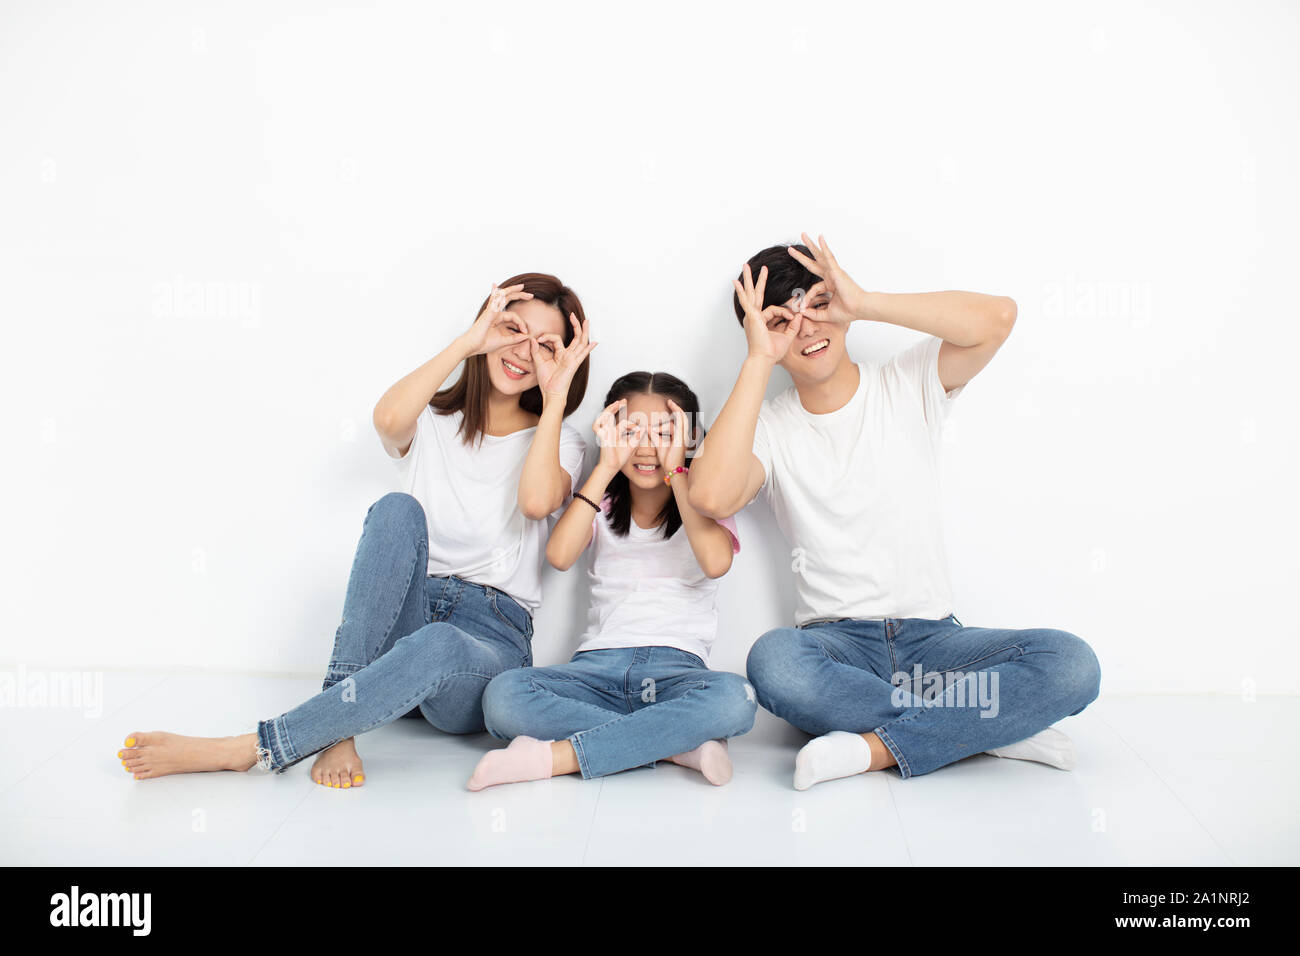 happy young family sitting on floor with looking gesture Stock Photo